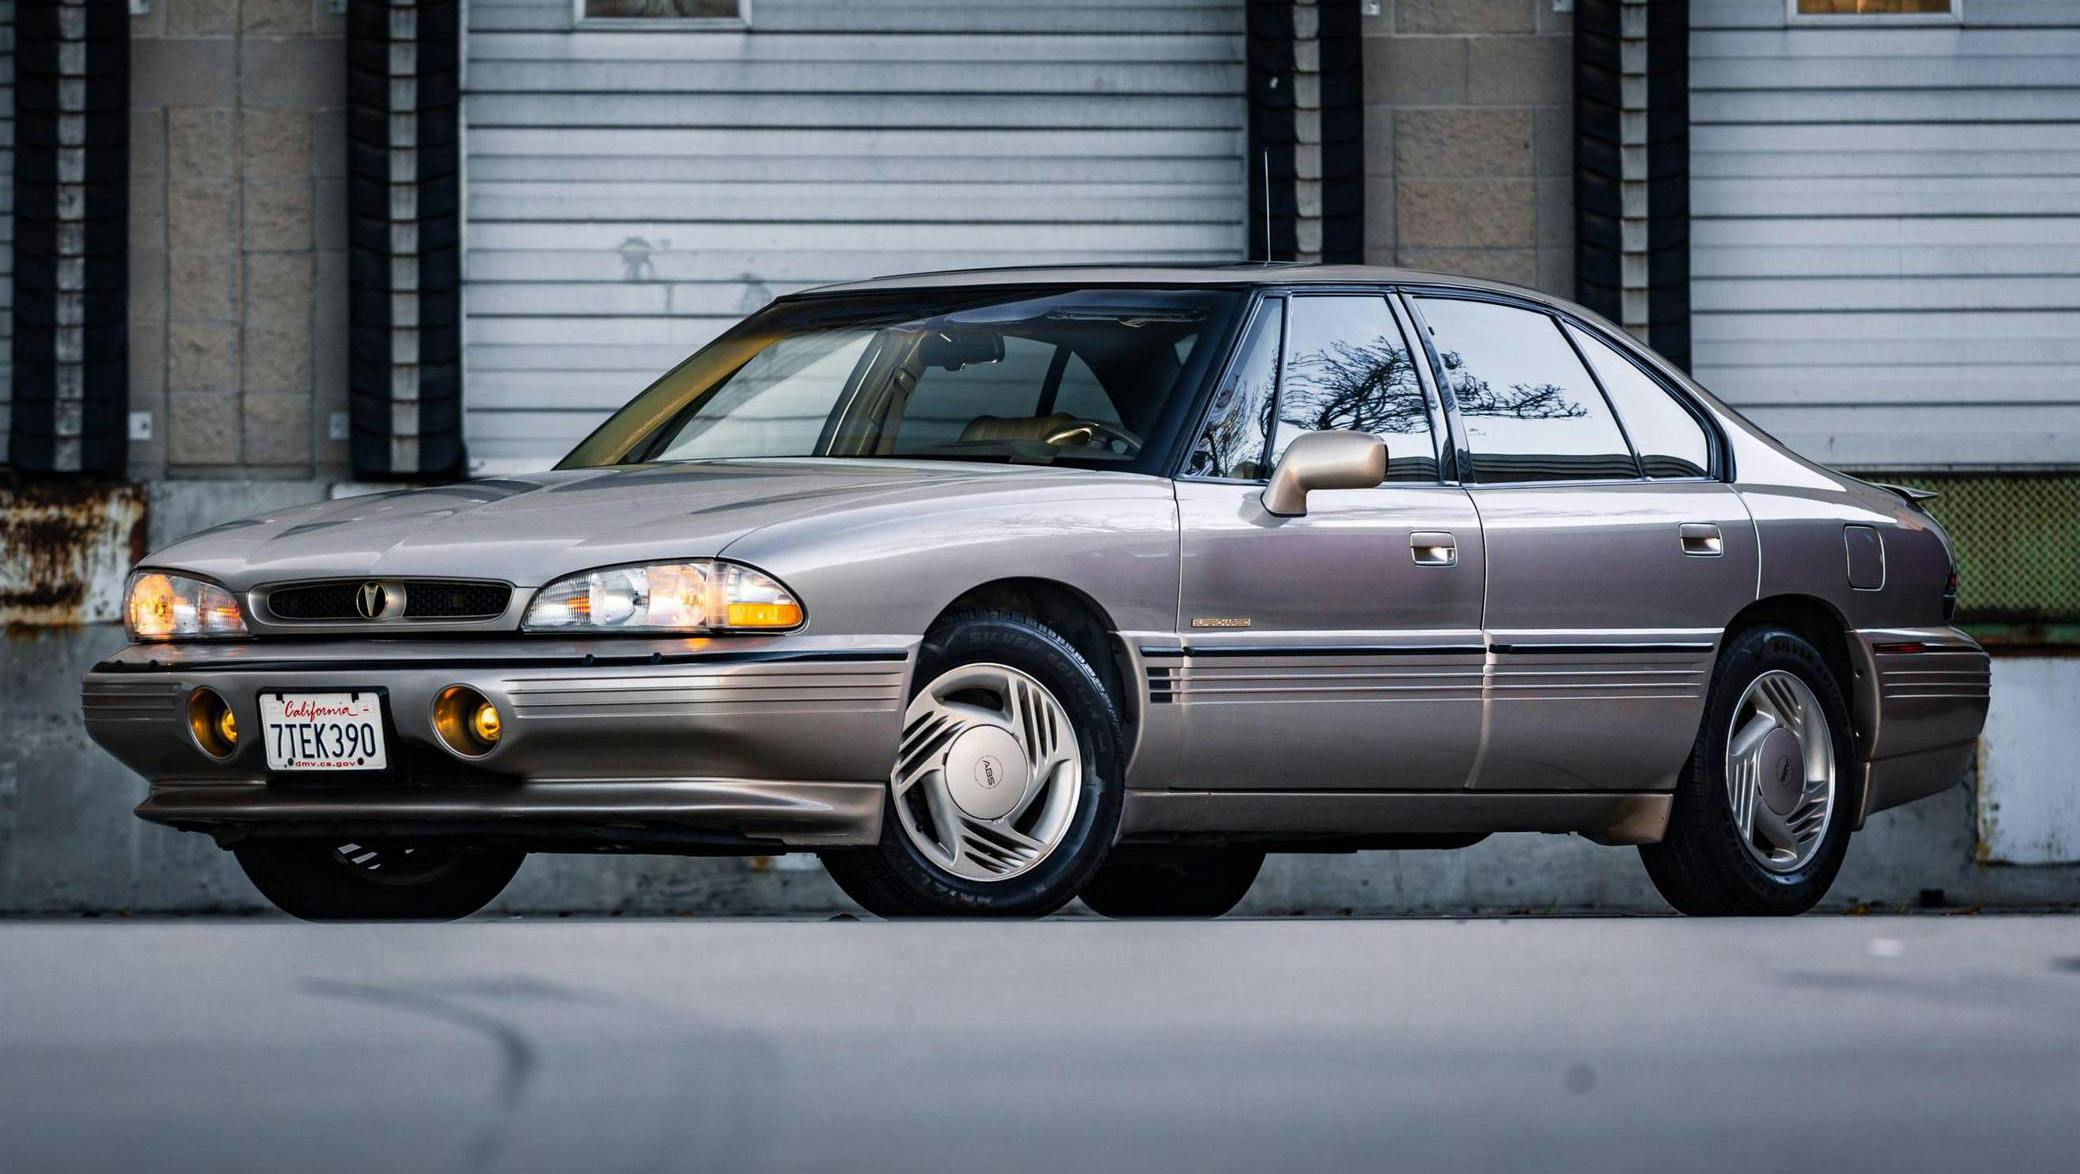 90s cars are hot, but not this honest American family car